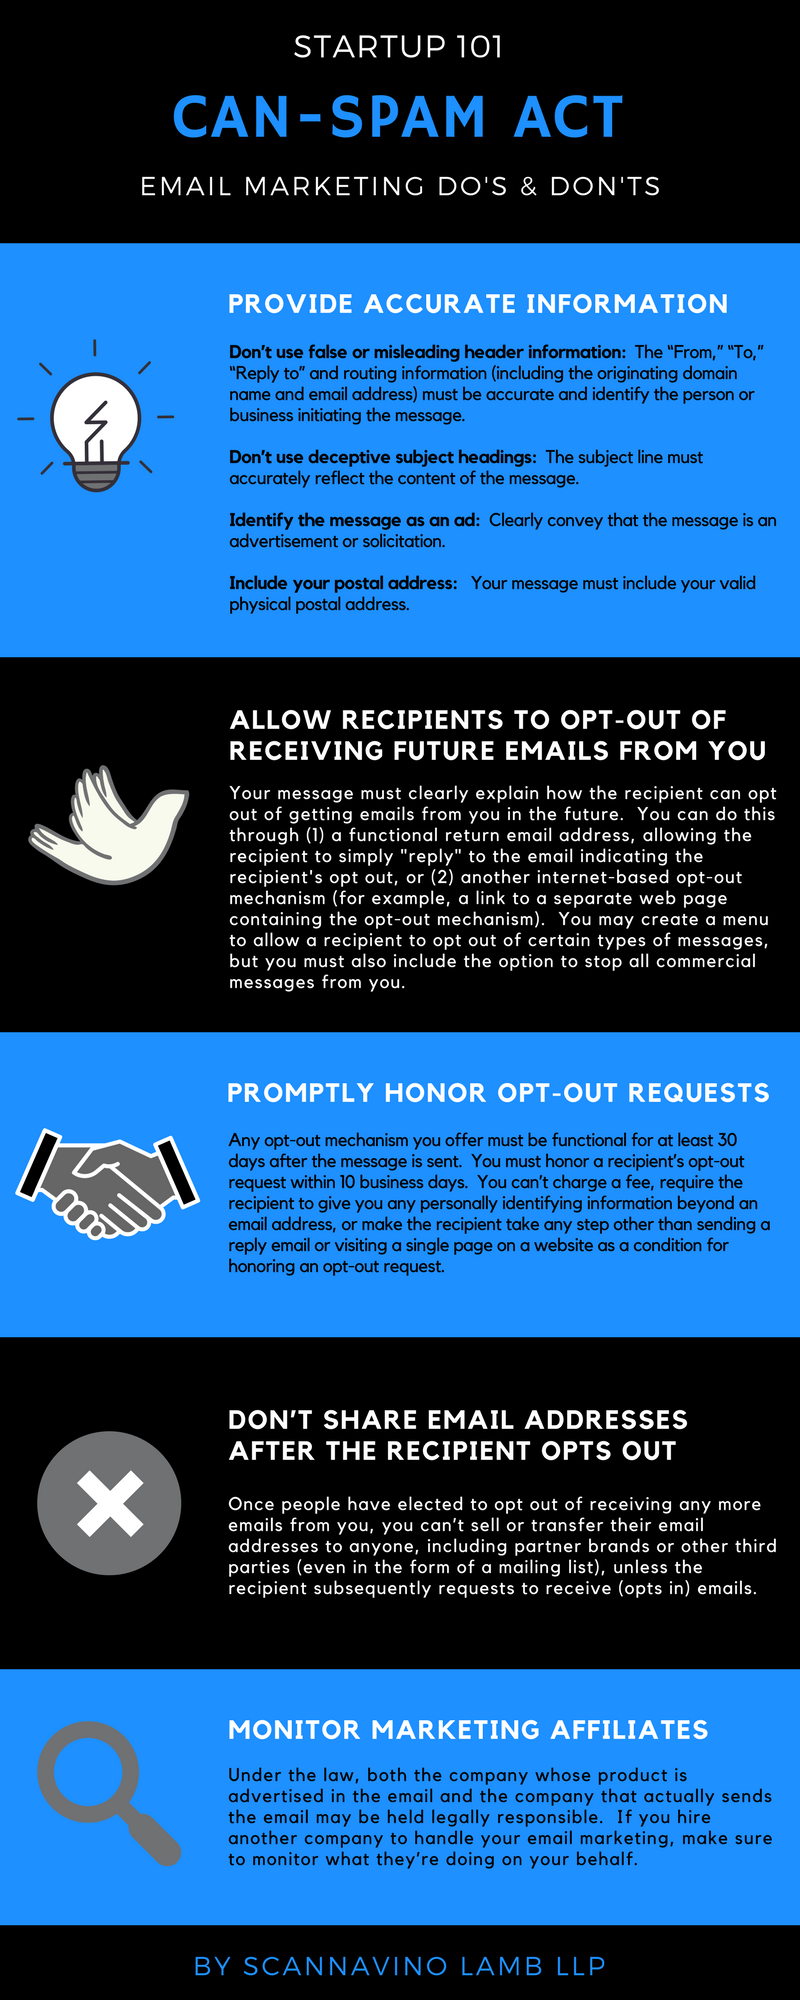 sales email compliance and best practices: CAN-SPAM Act Laws